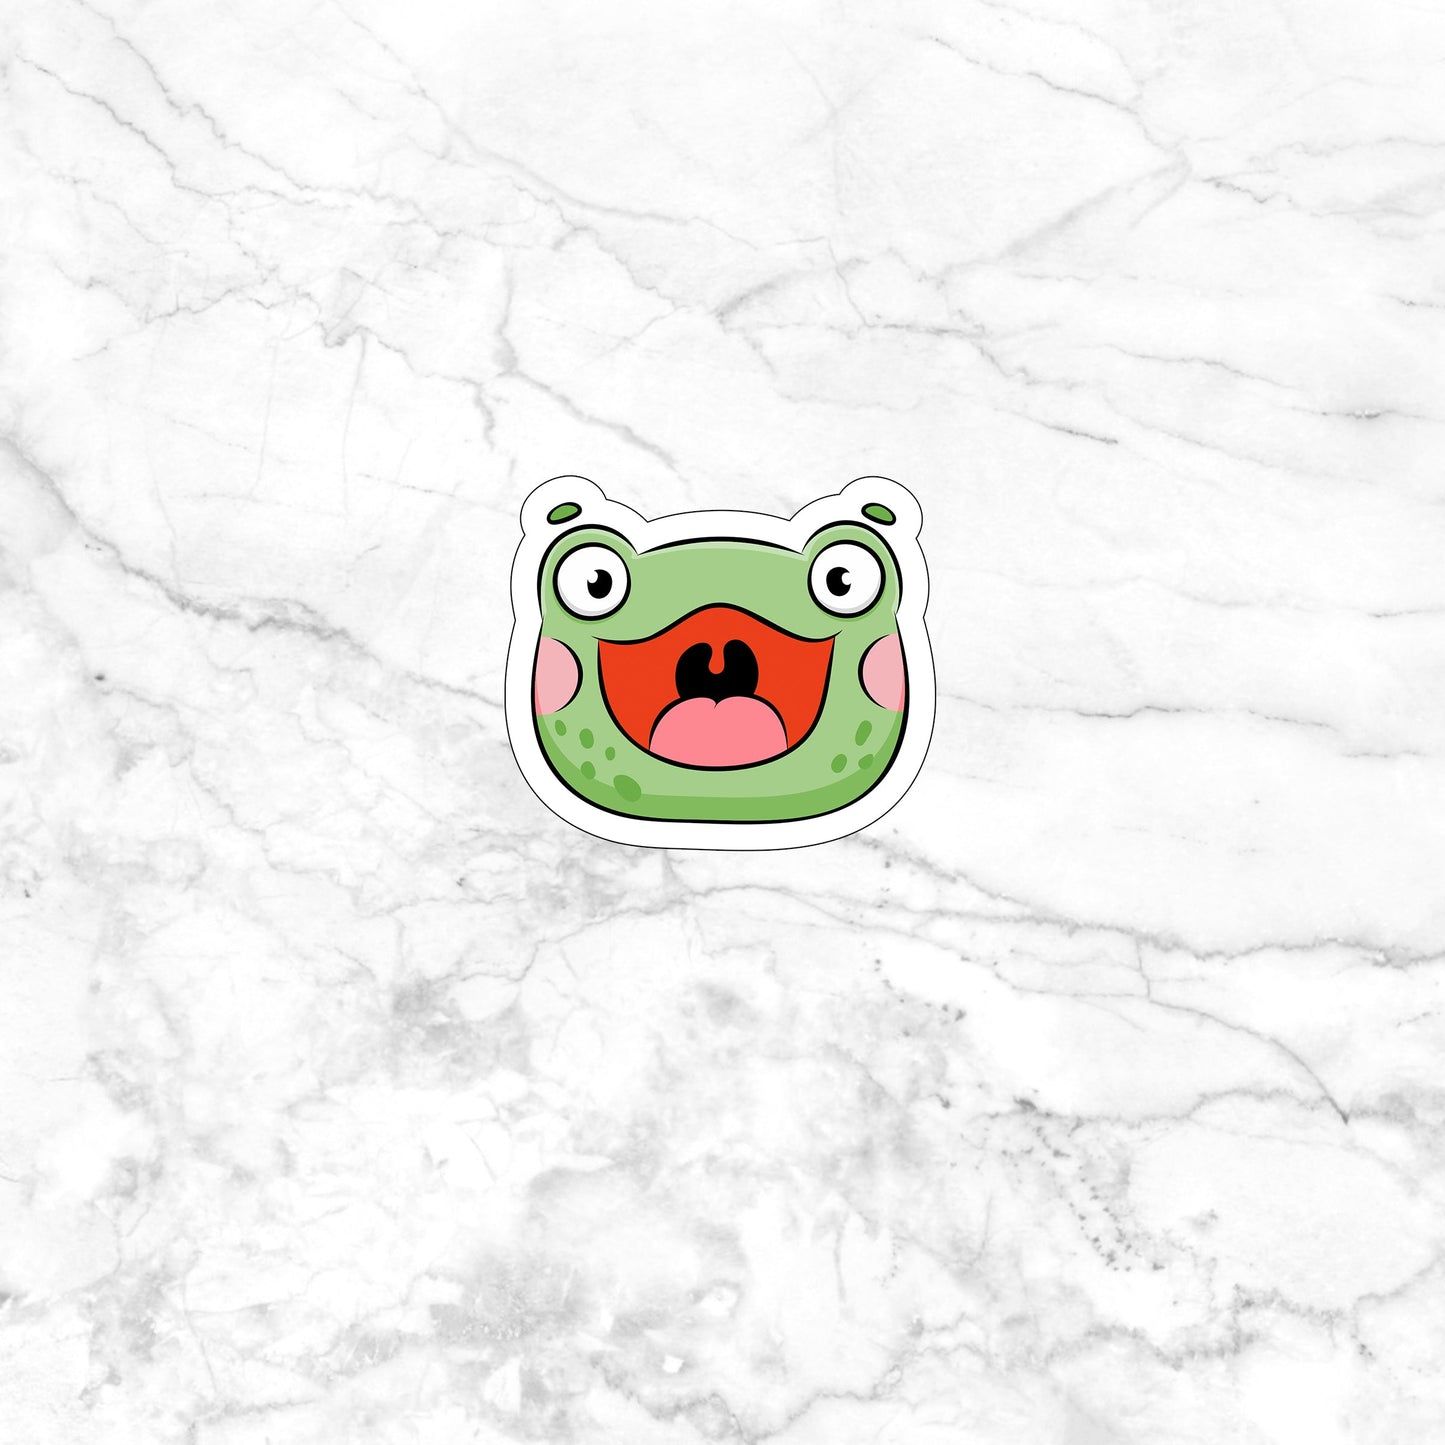 Frog Face sticker   Stickers